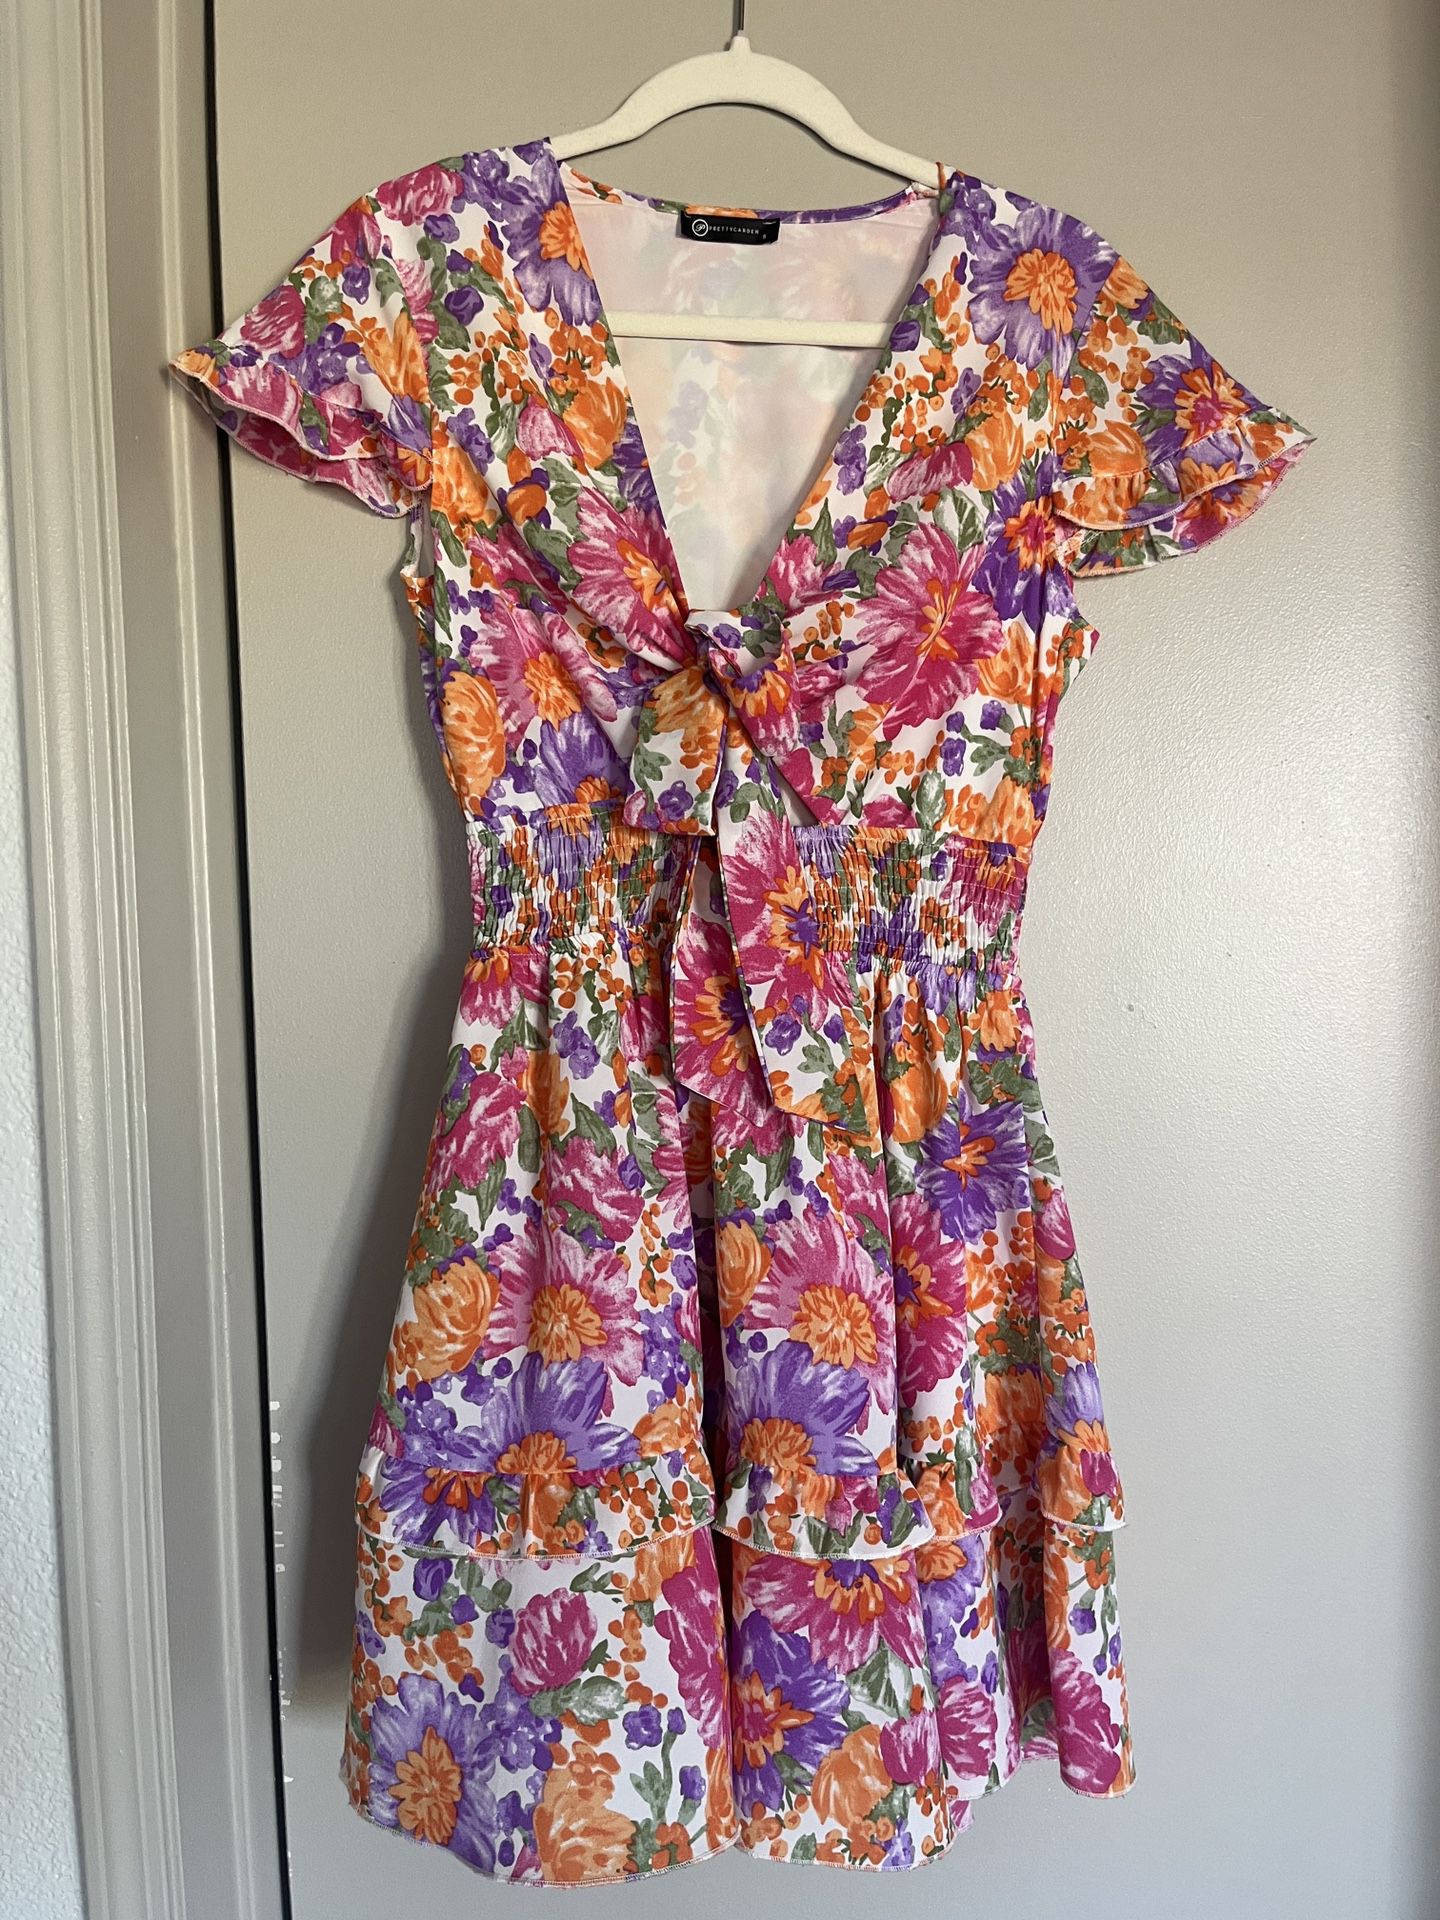 Women’s Floral Dress - Size Small